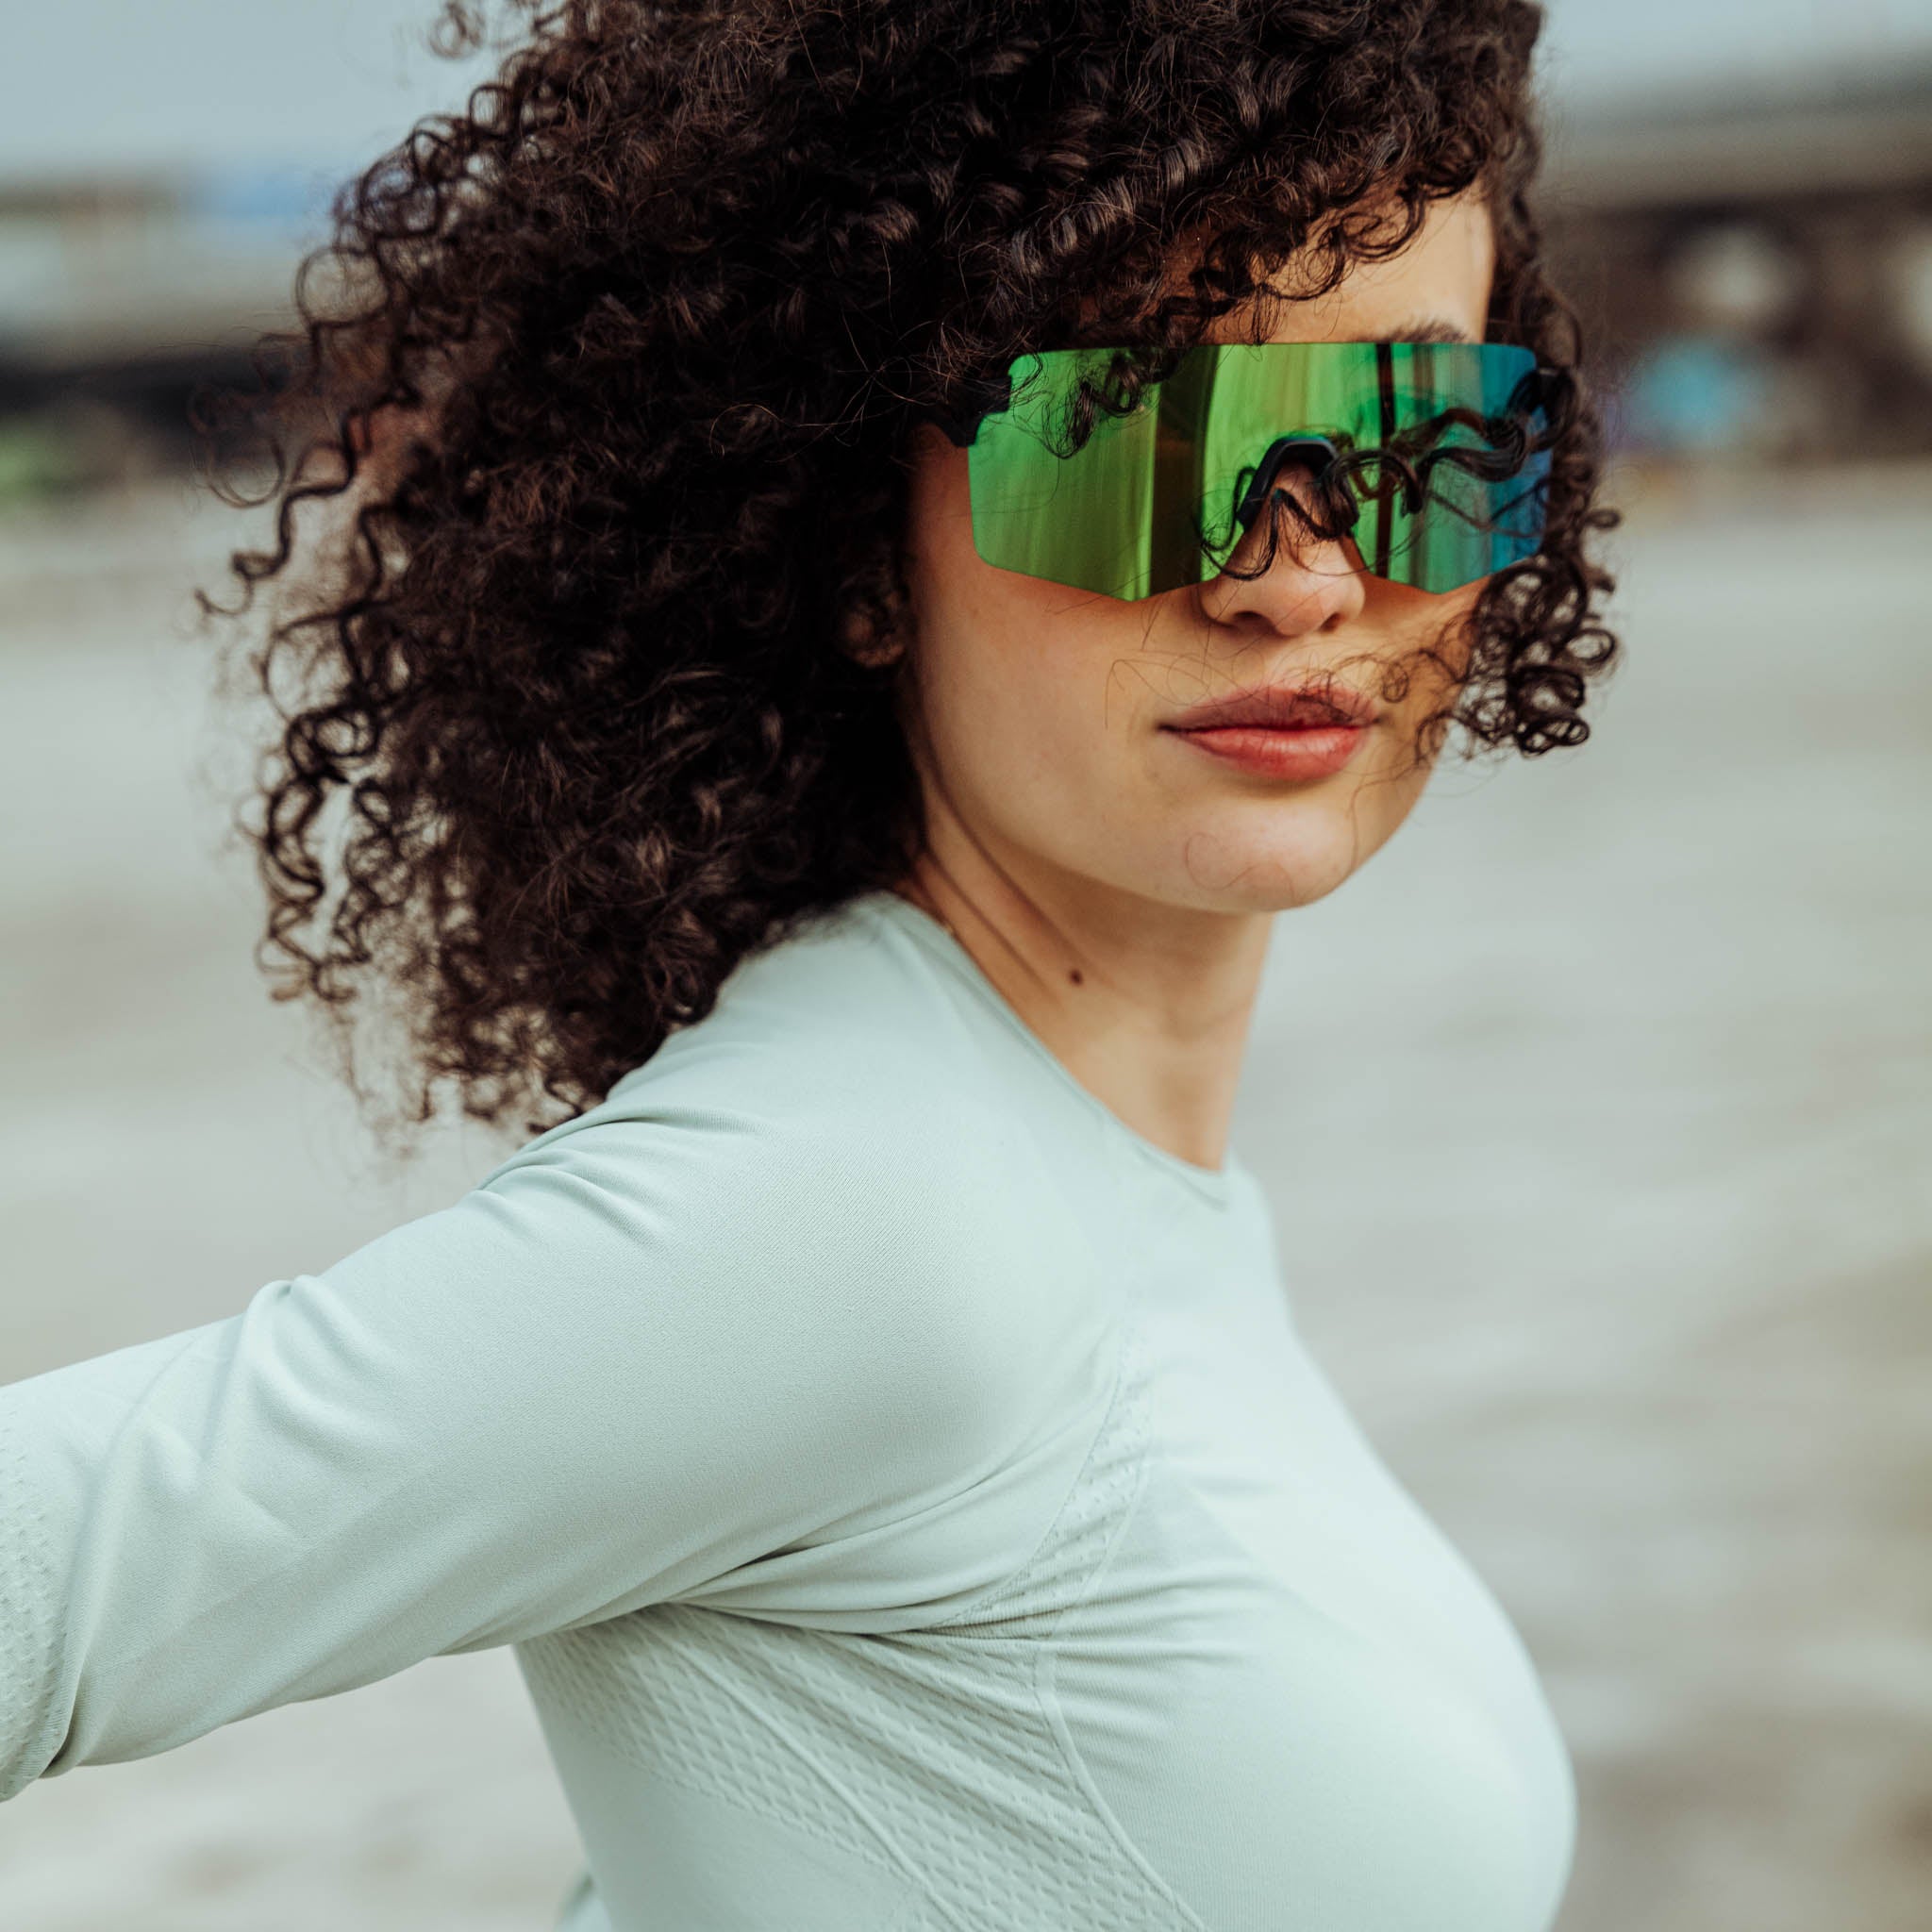 Young athlete with curly hair and large green sports sunglasses